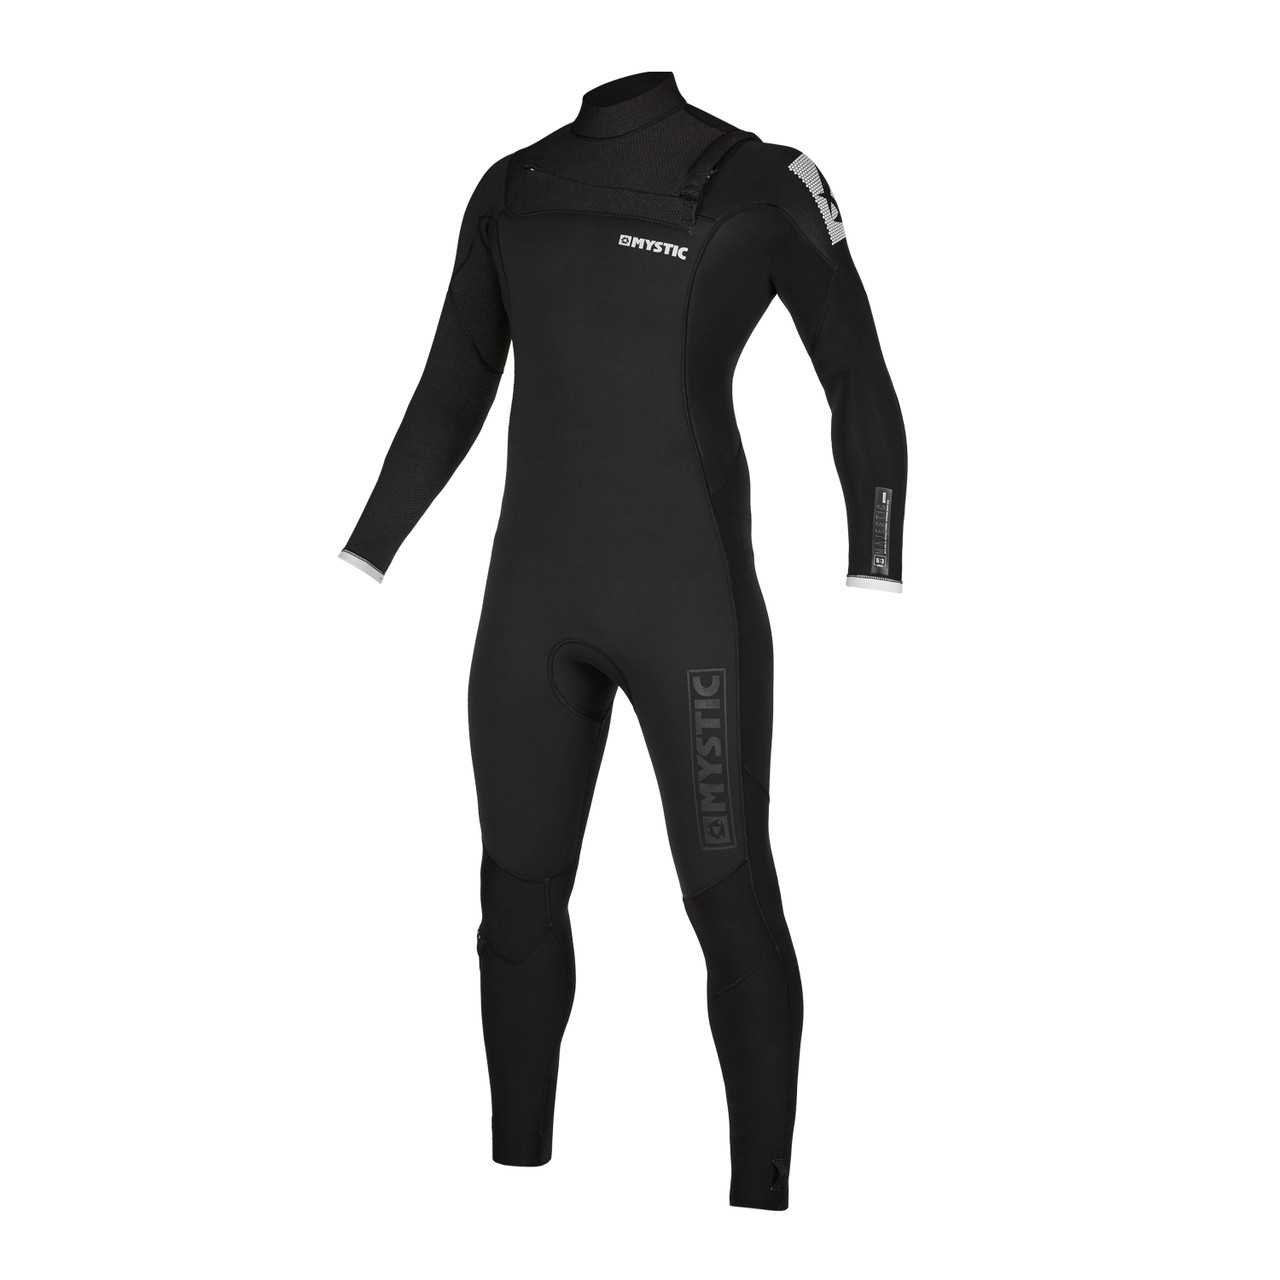  Big And Tall Wetsuit